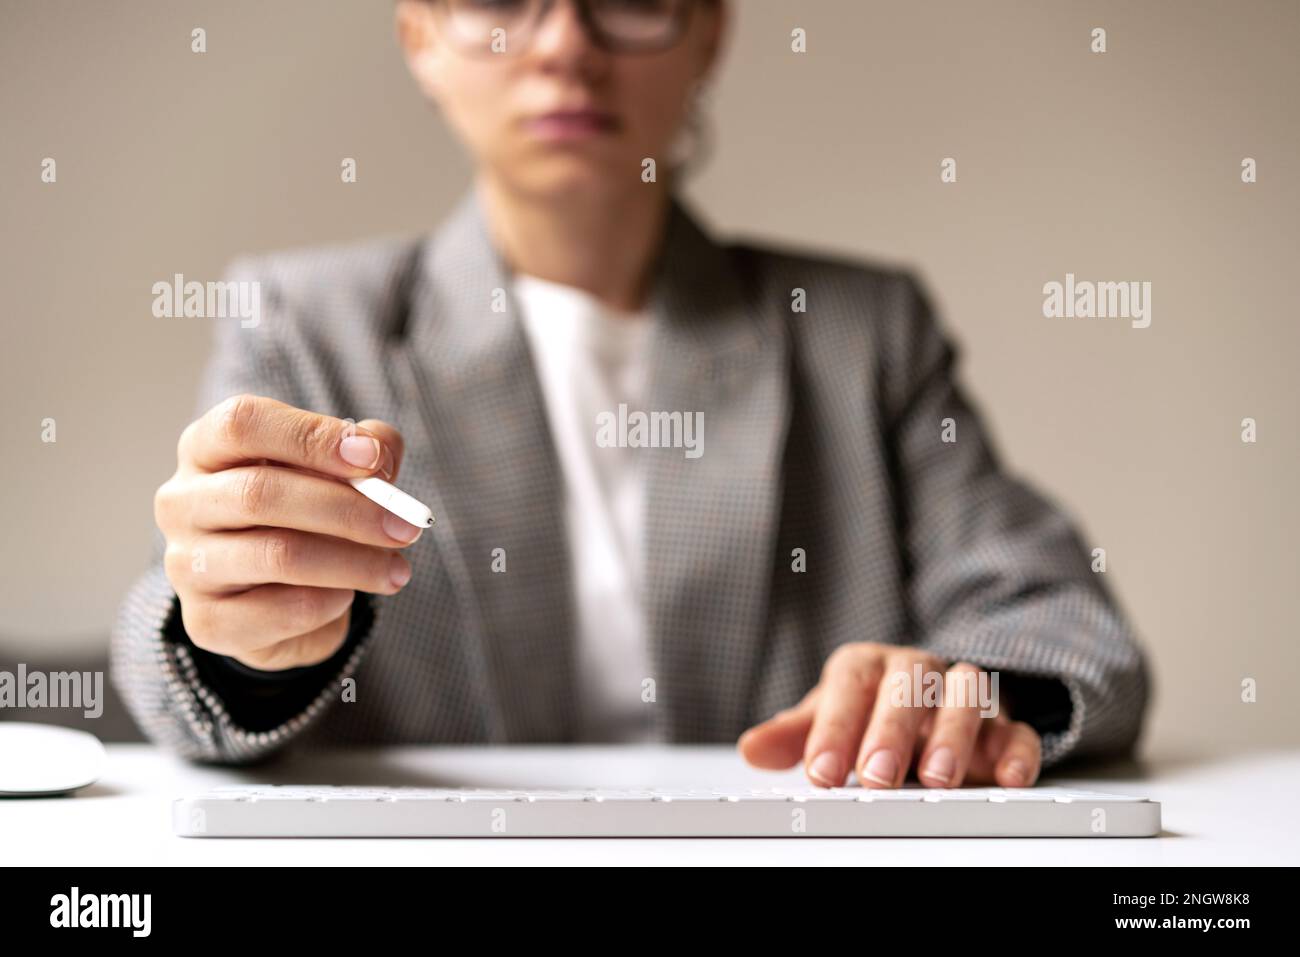 Female business person signing virtual contract using digital pen stylus, space for photomontage insert infographic. Stock Photo